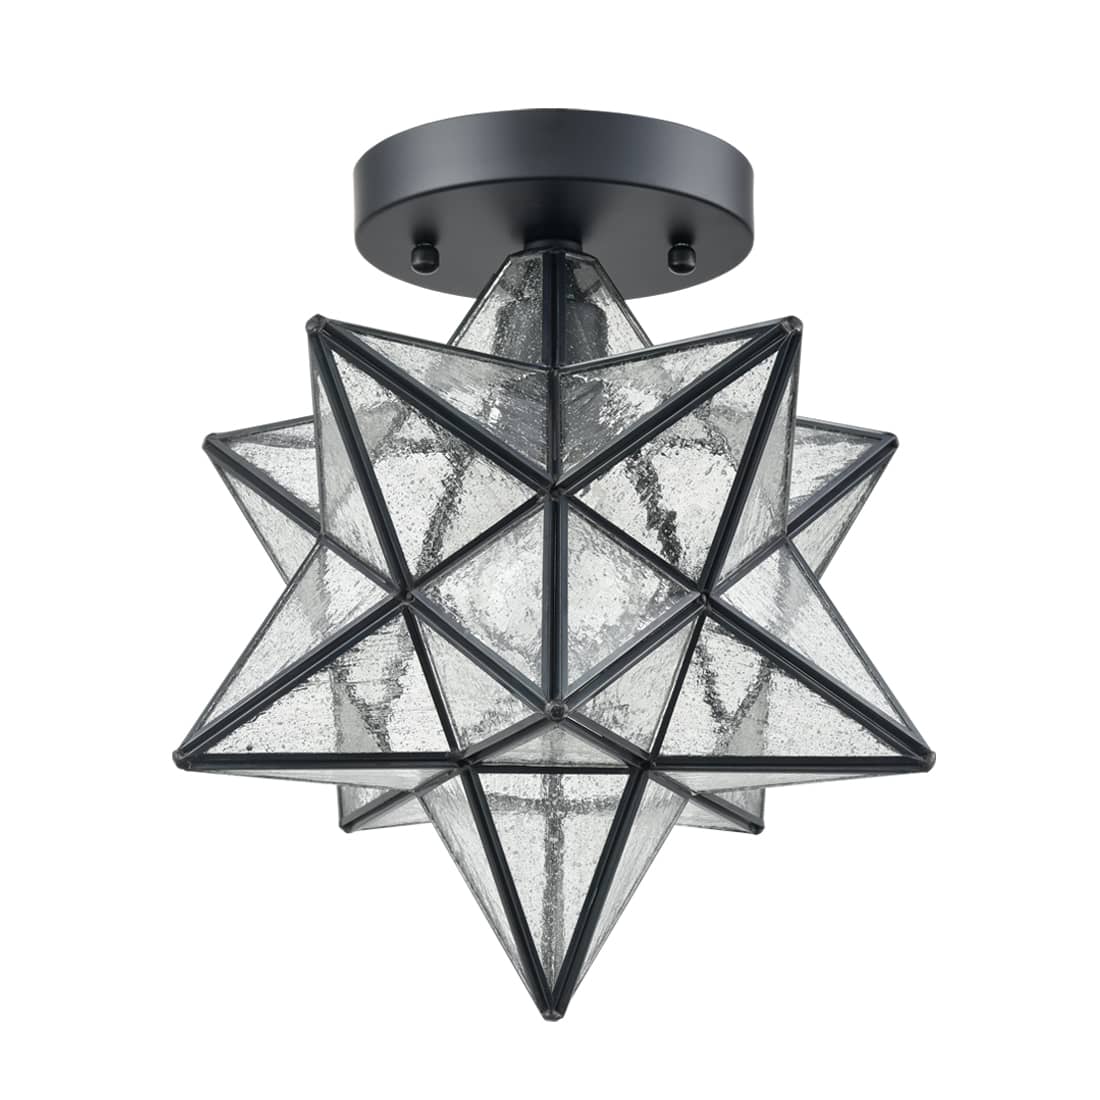 Industrial Moravian Star Ceiling Light with Seeded Glass 12 inches